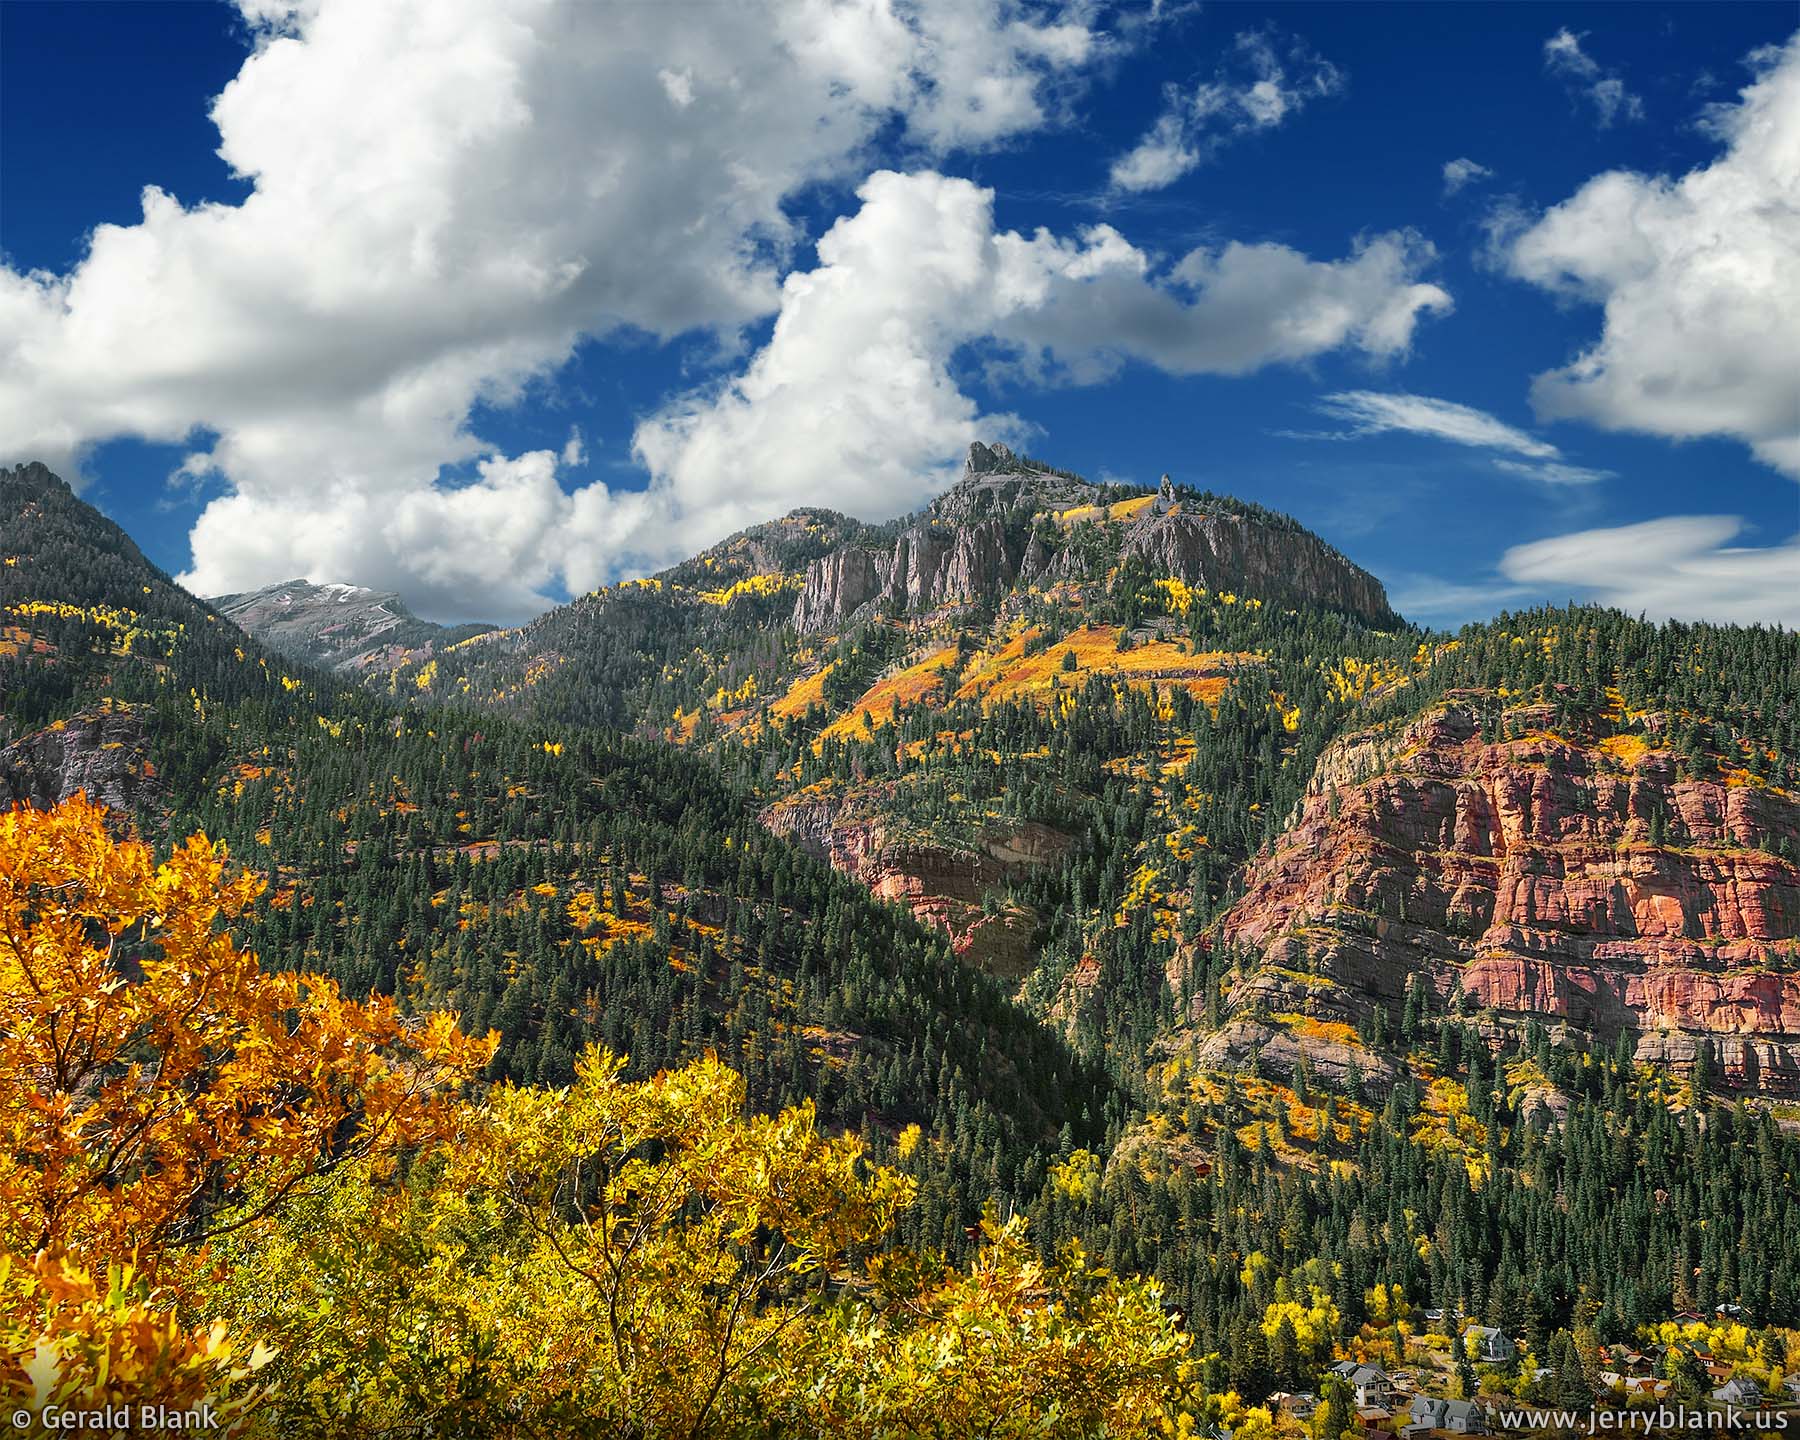 #06683 - A colorful autumn view looking southeast over Ouray, Colorado, toward Twin Peaks - photo by Jerry Blank